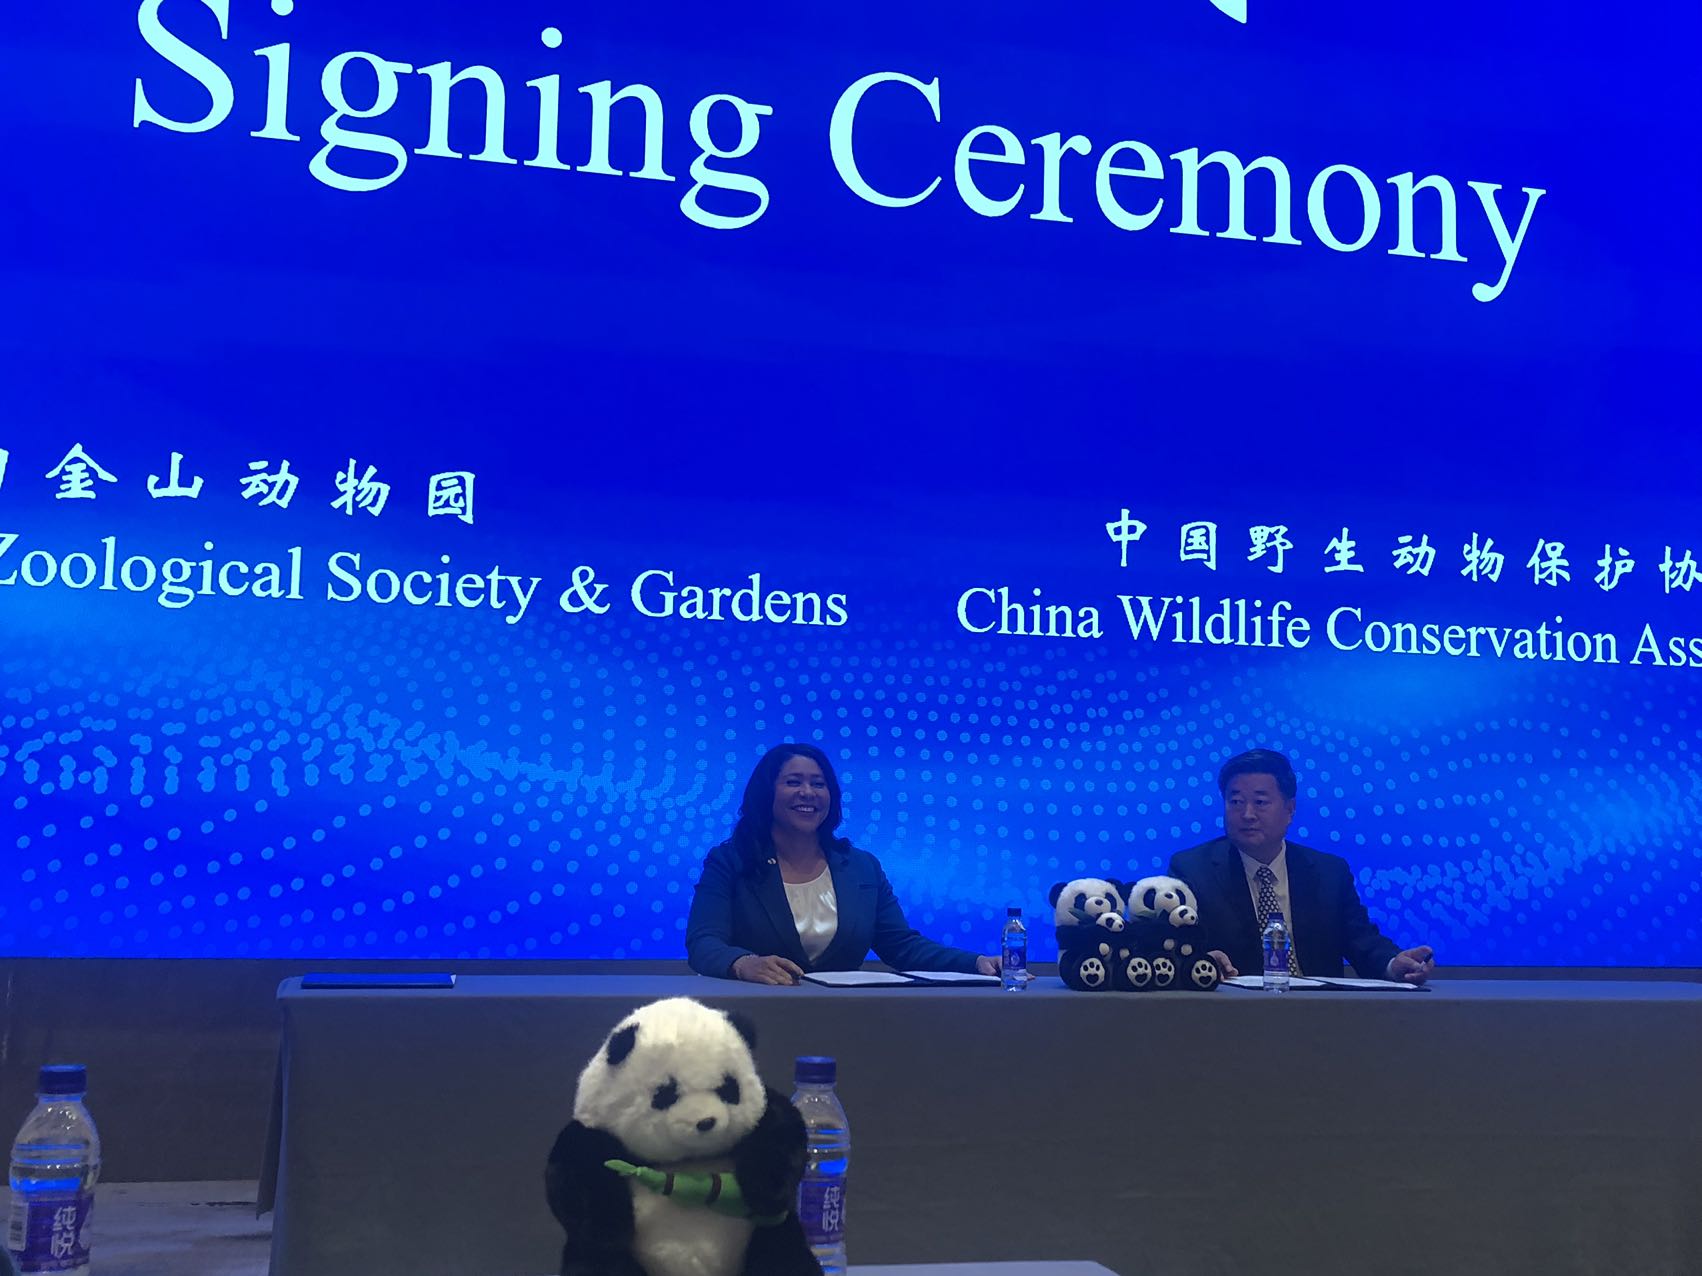 Two people are seated at a table with a &quot;Signing Ceremony&quot; backdrop, flanked by plush panda toys.